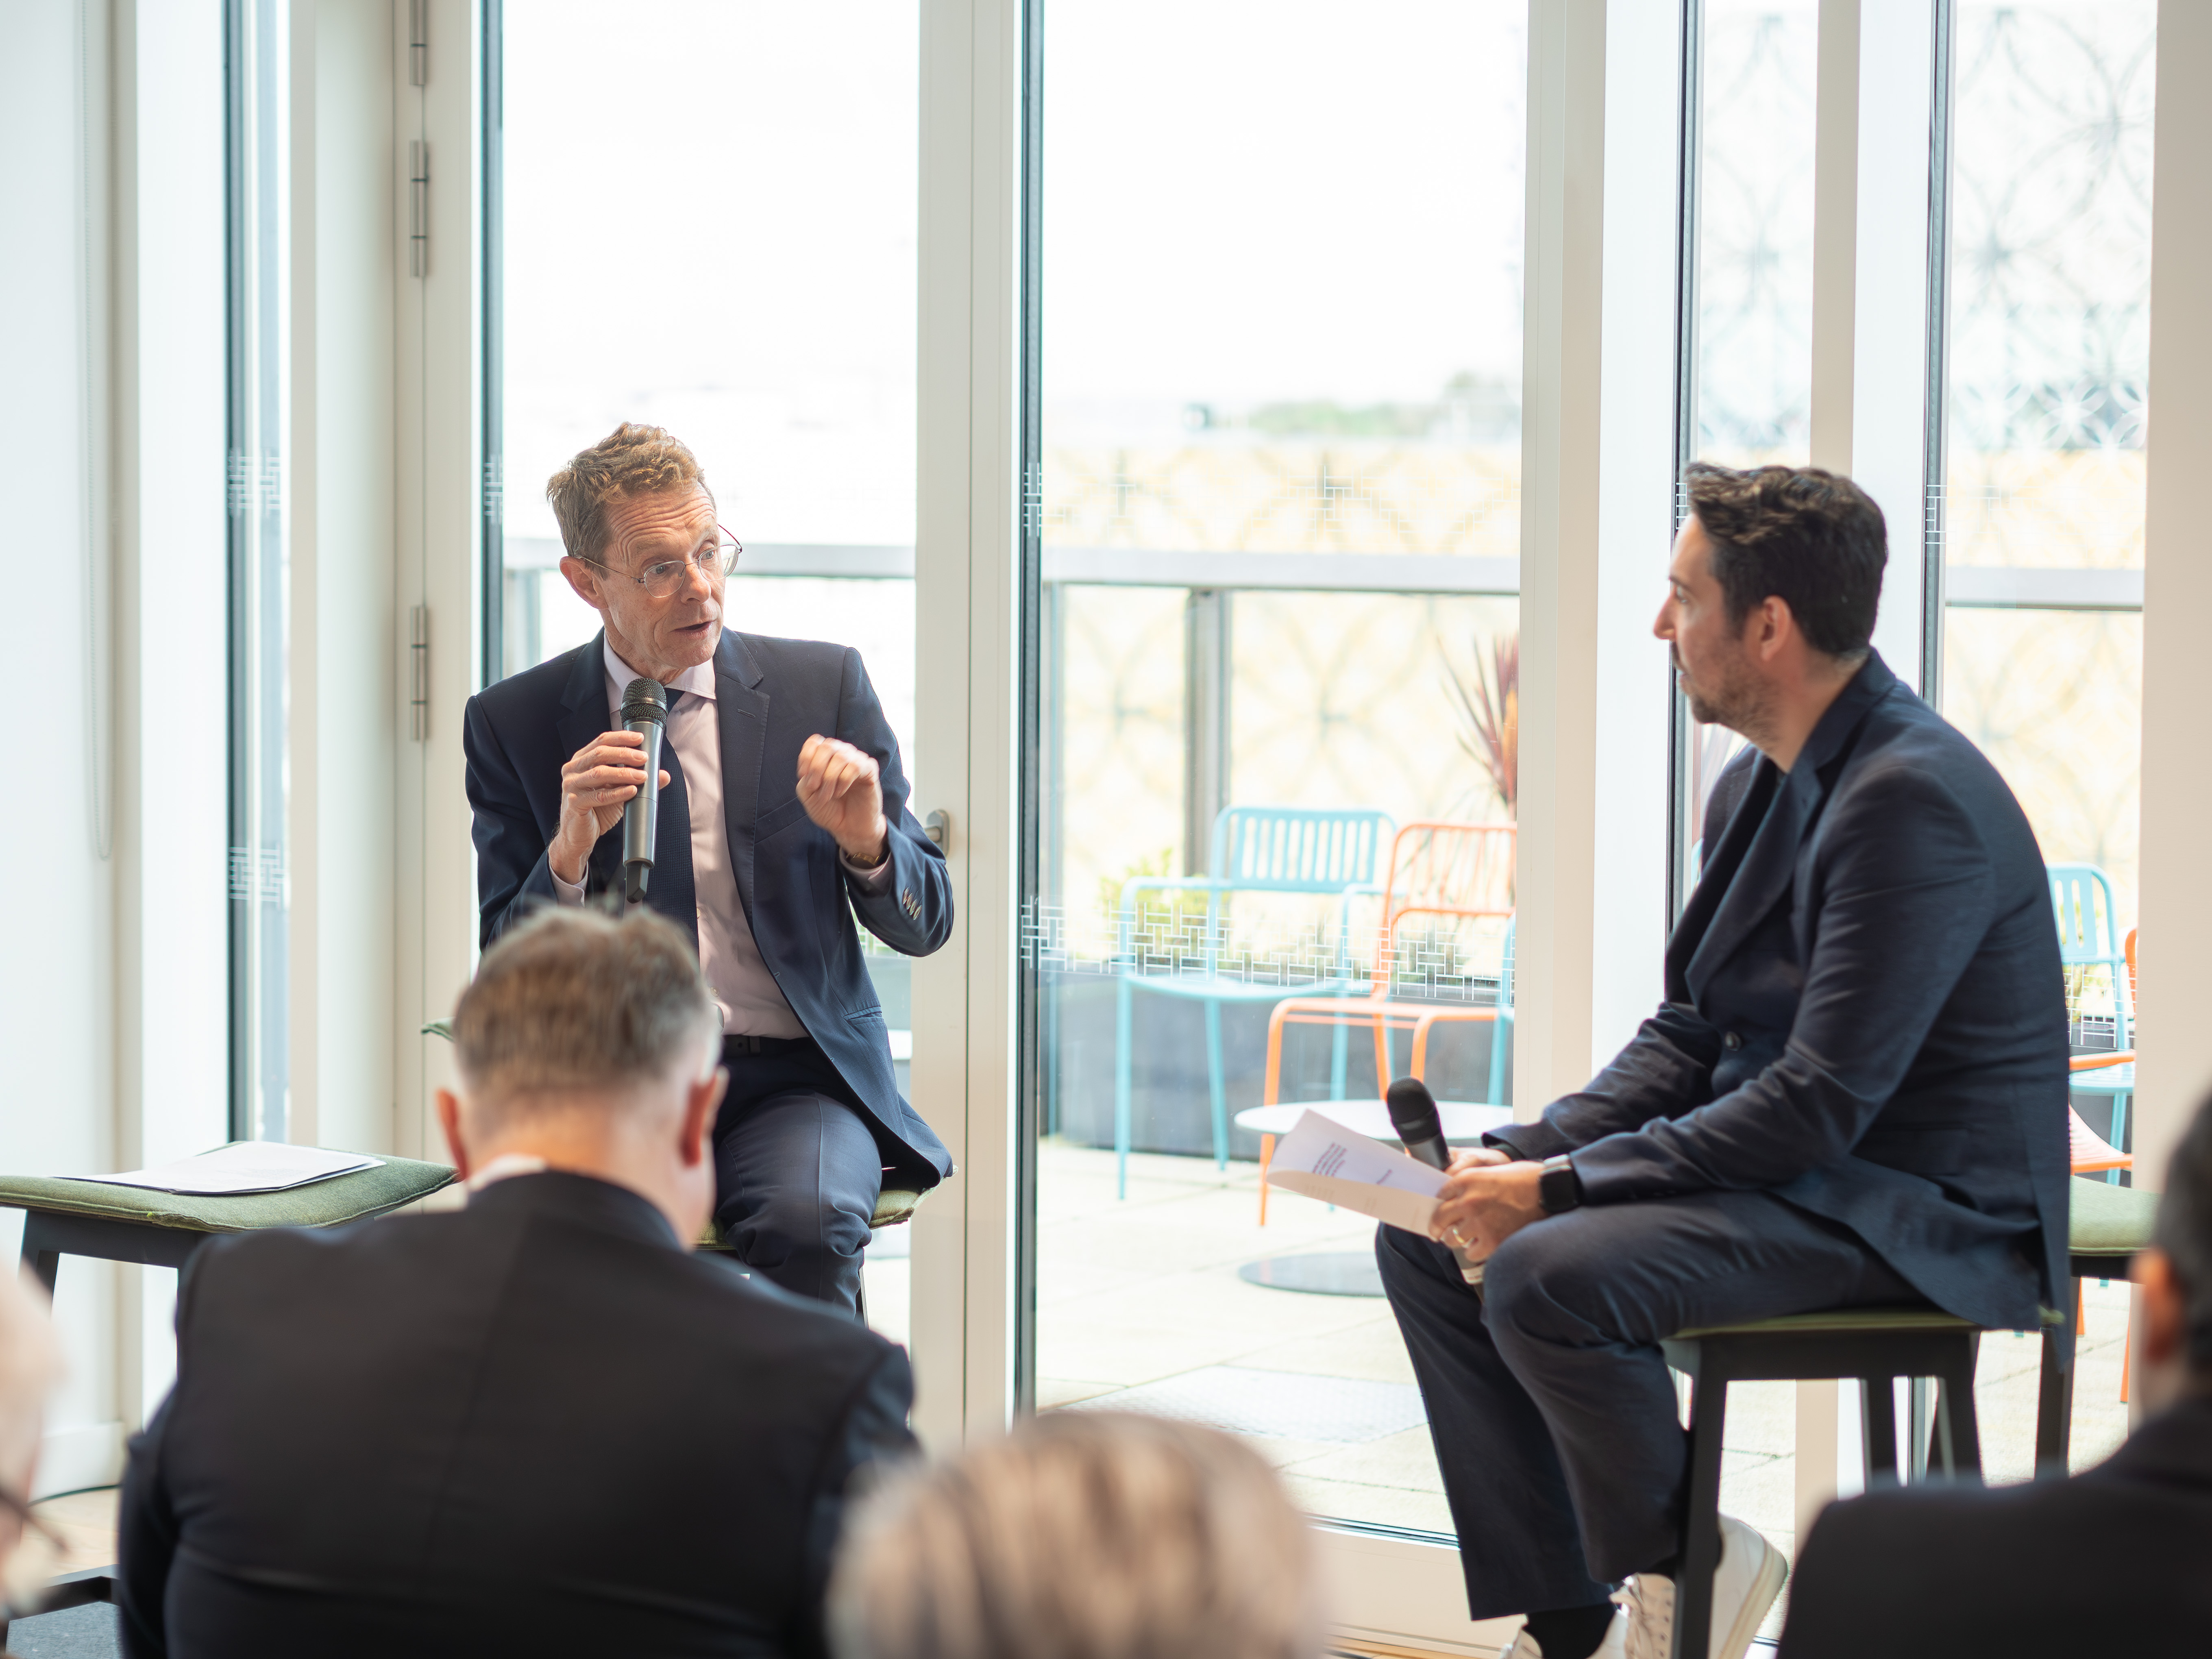 Andy Street, Mayor of the West Midlands, left, with Yiannis Maos MBE, Chief Executive Officer at TechWM, speaking at the leadership breakfast panel at the launch of Birmingham Tech Week. Photograph: Edwin Ladd/Mr Ladd Media.